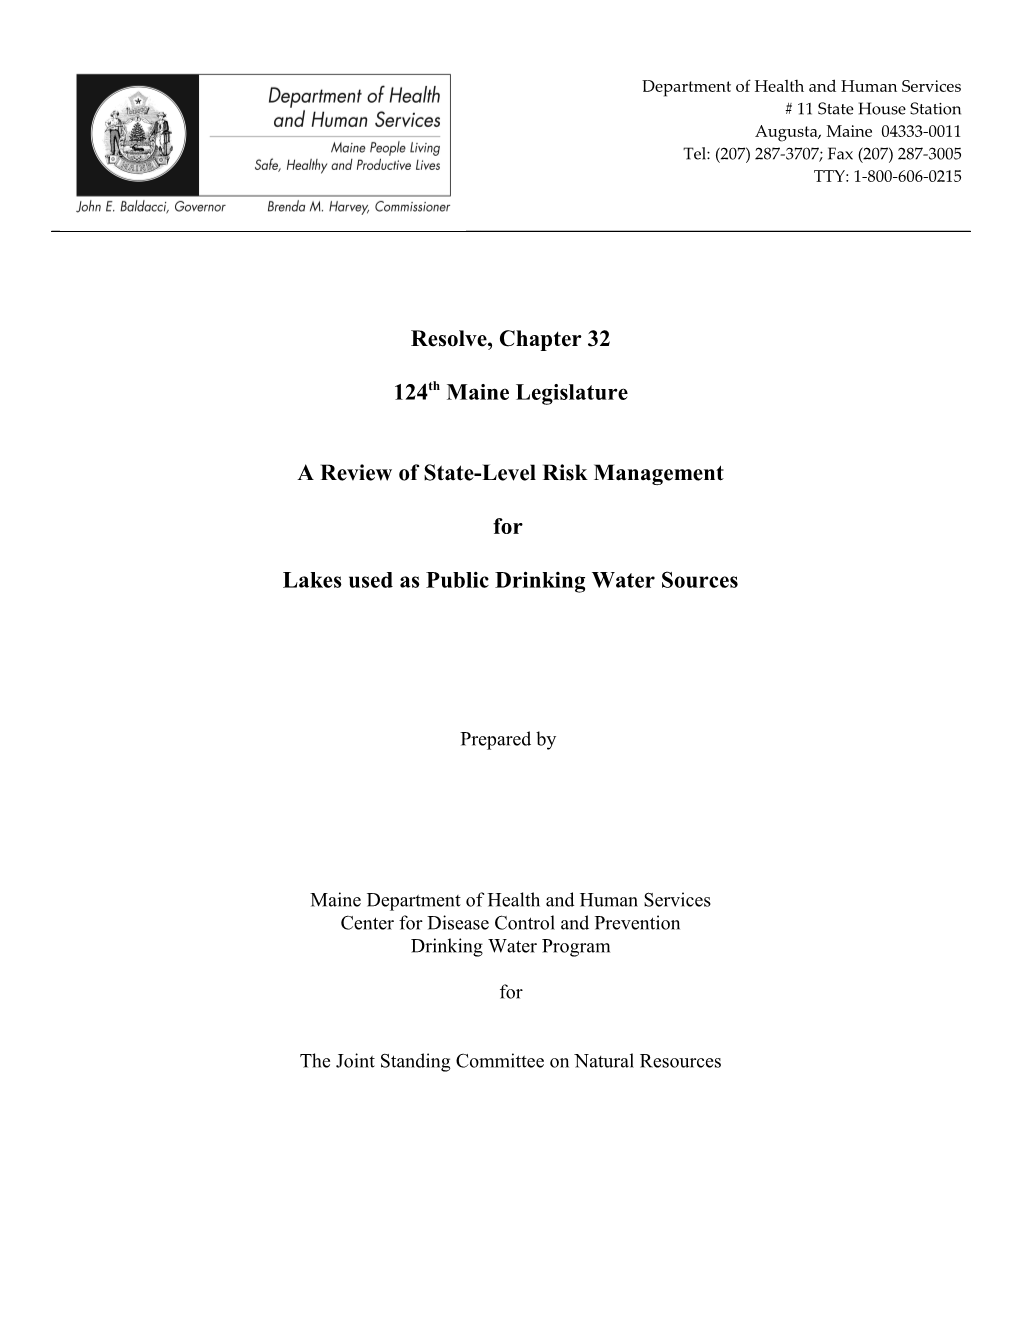 A Review of State-Level Risk Management